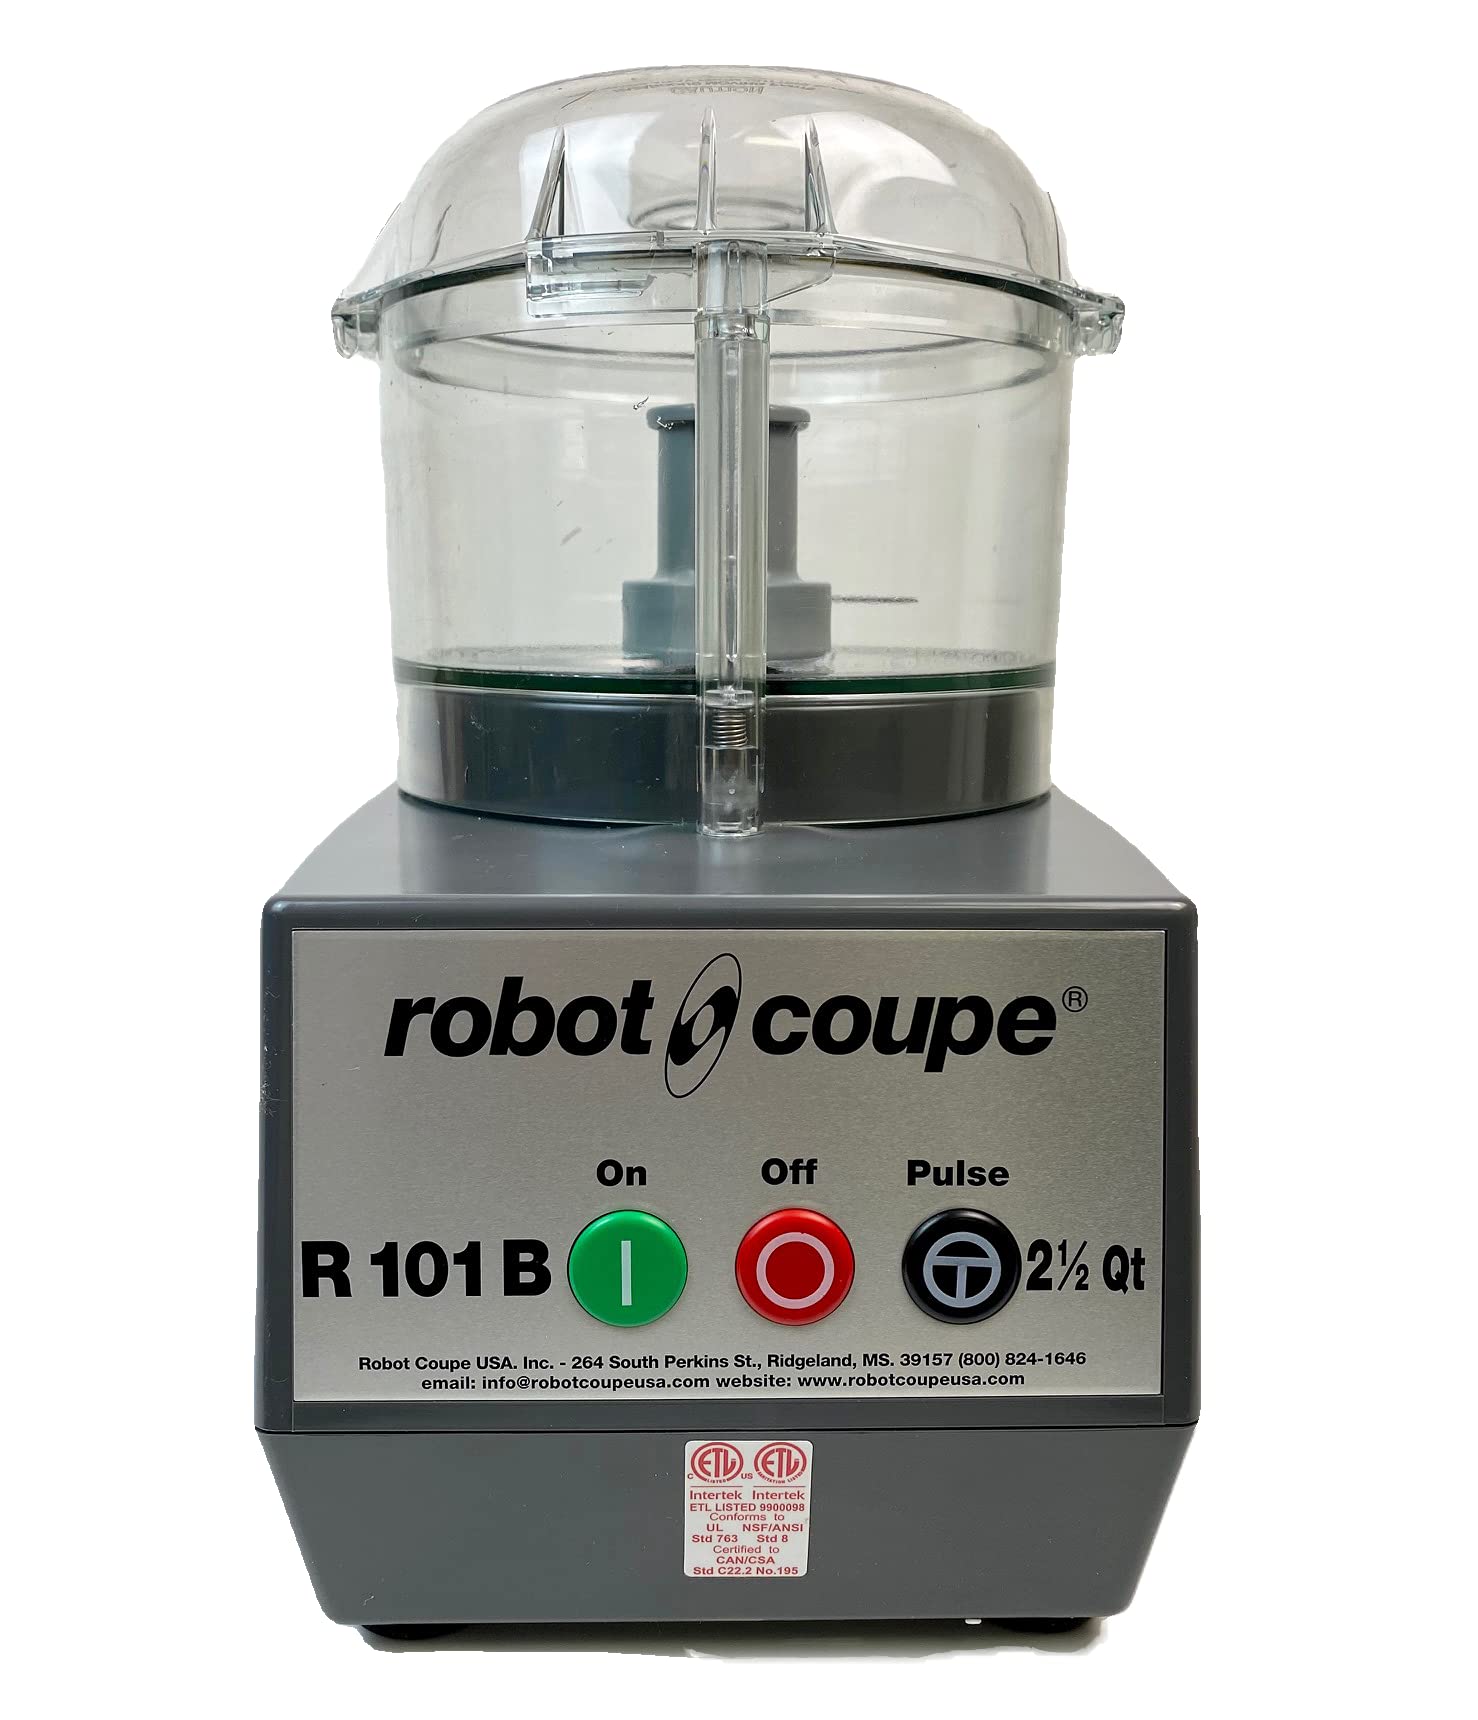 Dissatisfied With Your Robot Coupe R2 Bowl: Here